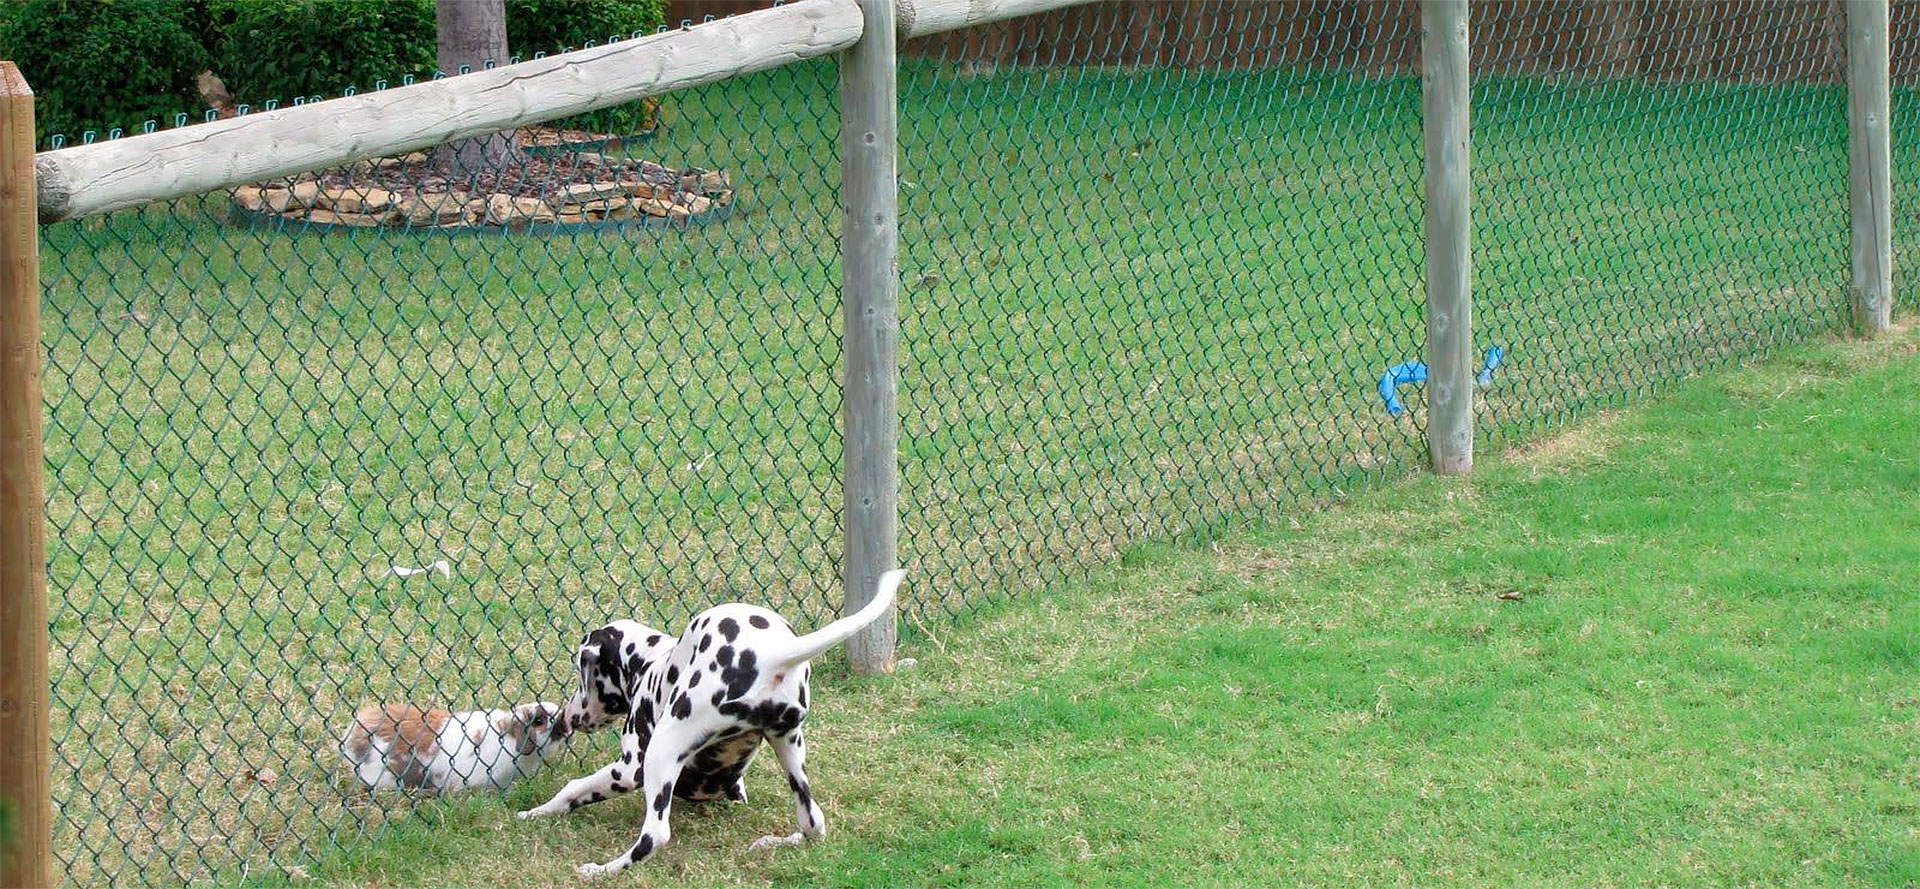 Two Dogs Between the Fence.